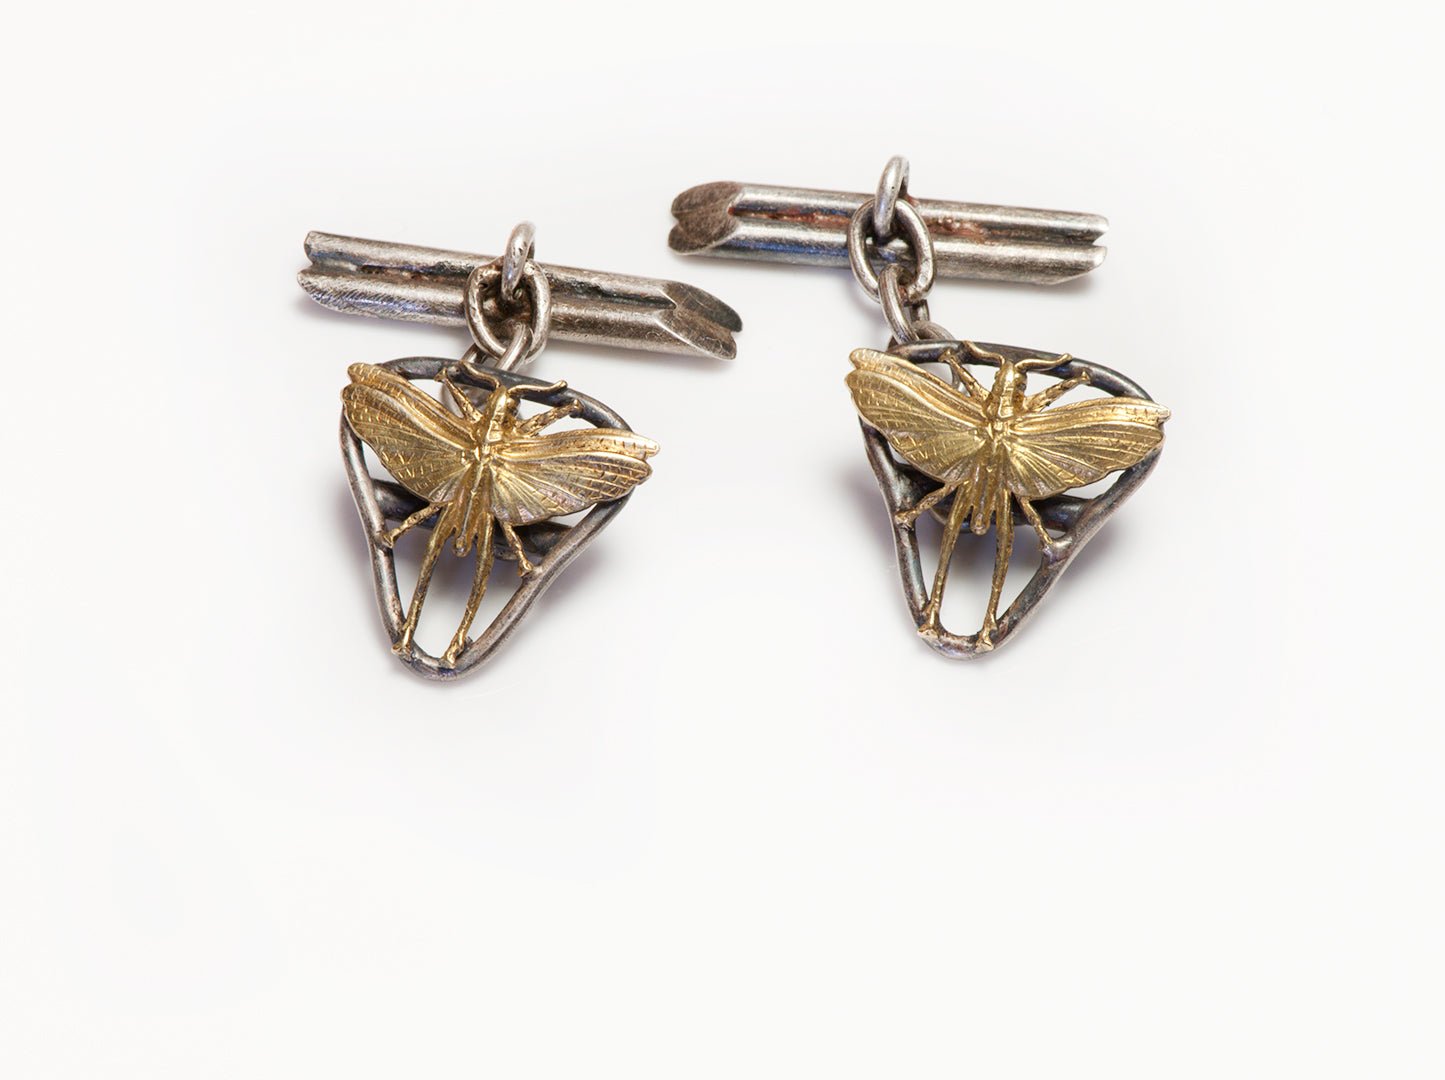 Vintage Gold & Silver Cufflinks - One Of The Most Elegant Accessories - DSF Antique Jewelry